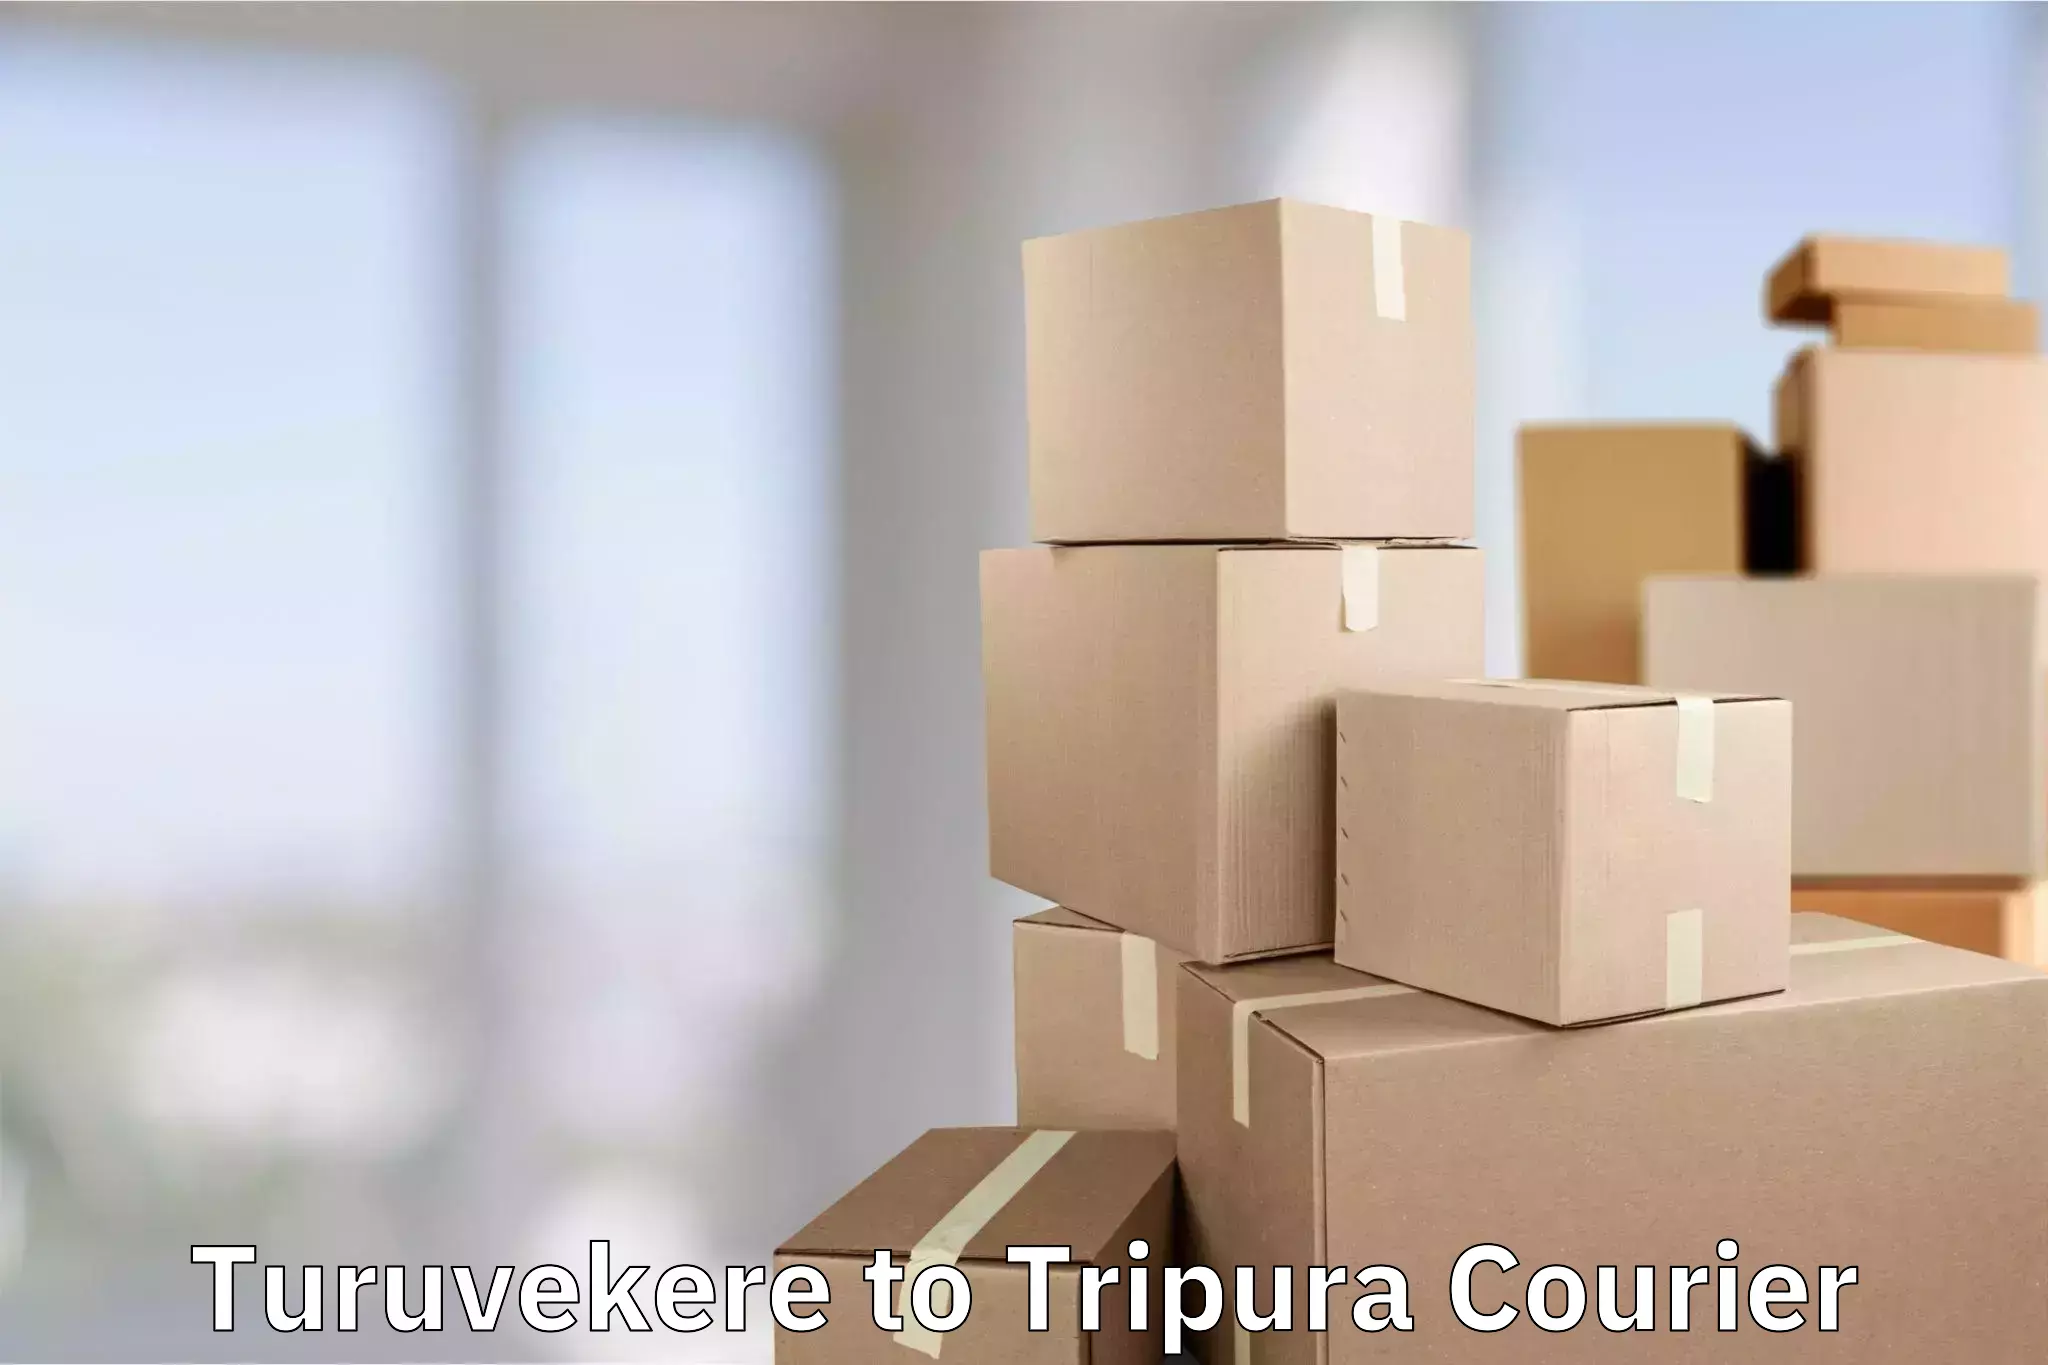 Luggage transport consulting Turuvekere to Udaipur Tripura